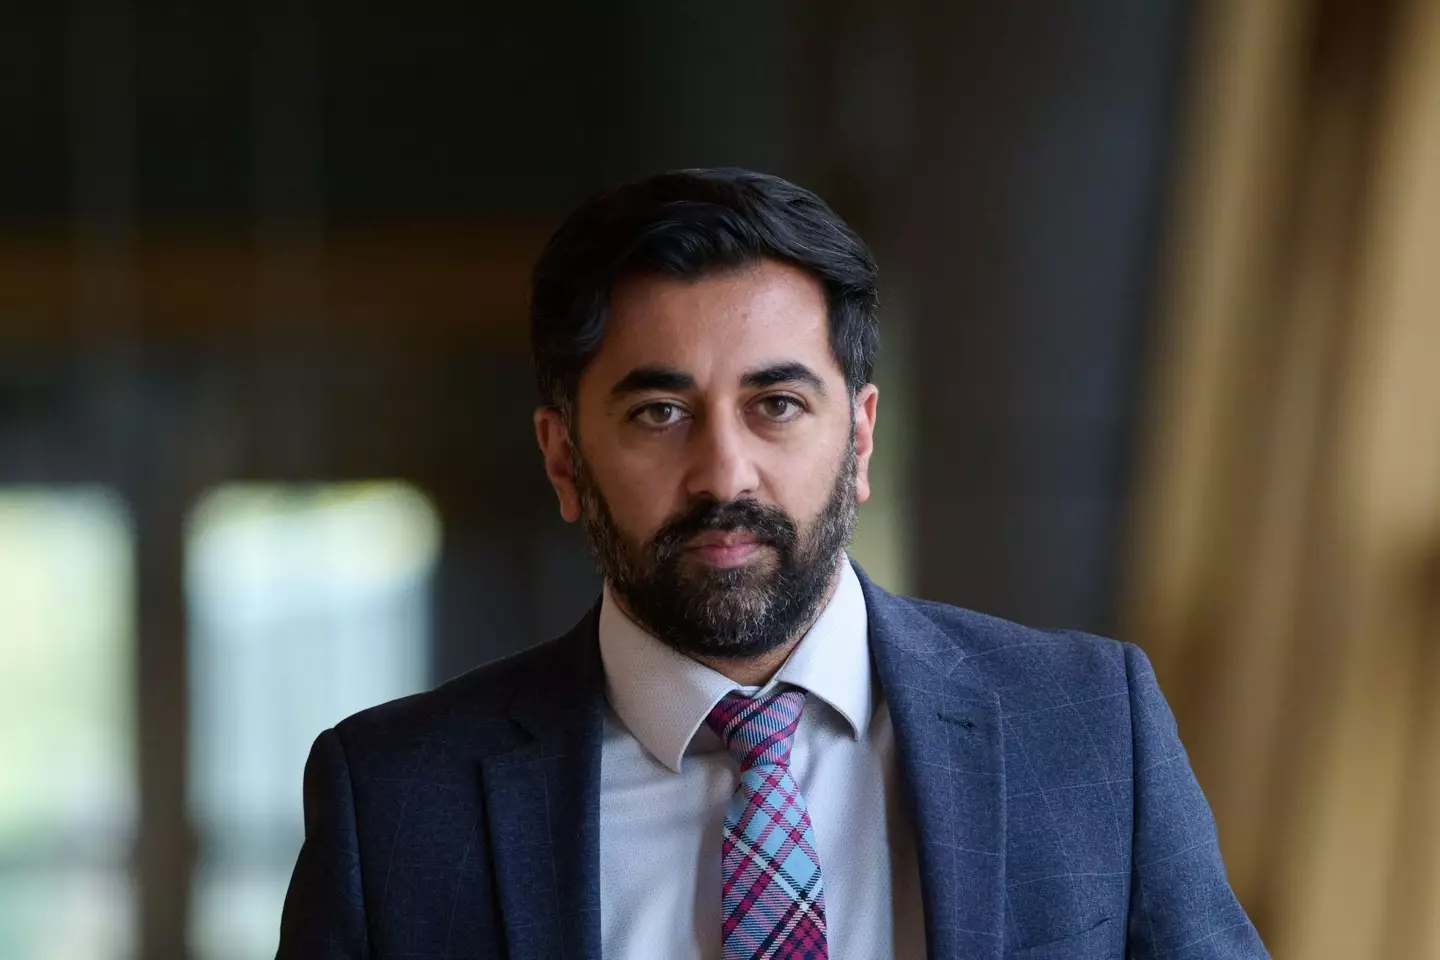 Scottish health minister Humza Yousaf said a ban would be among the options considered.